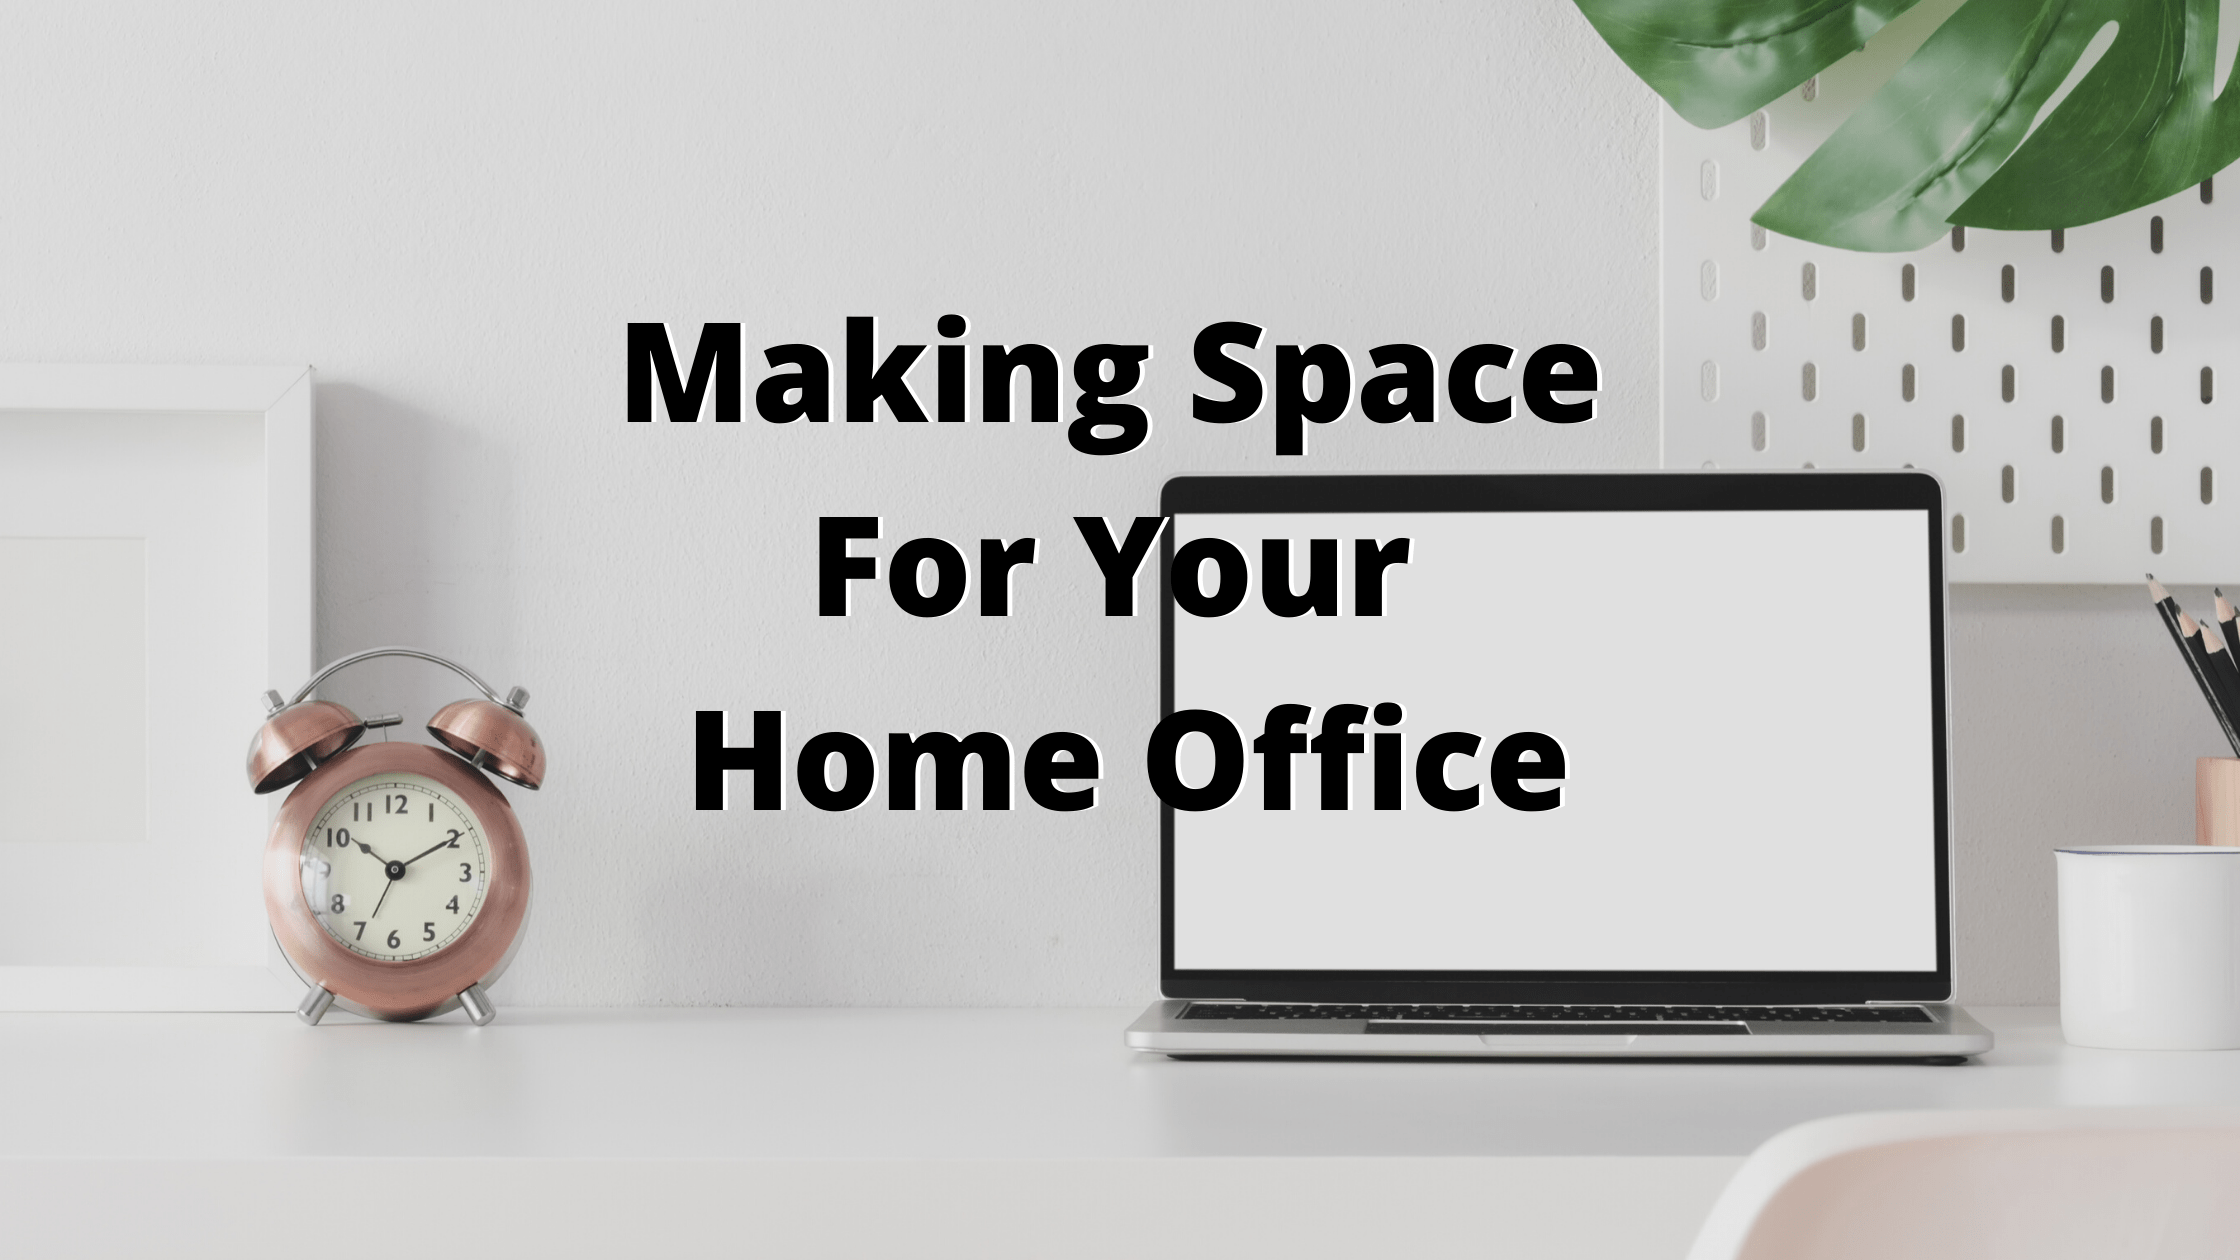 Making Space for your Home Office